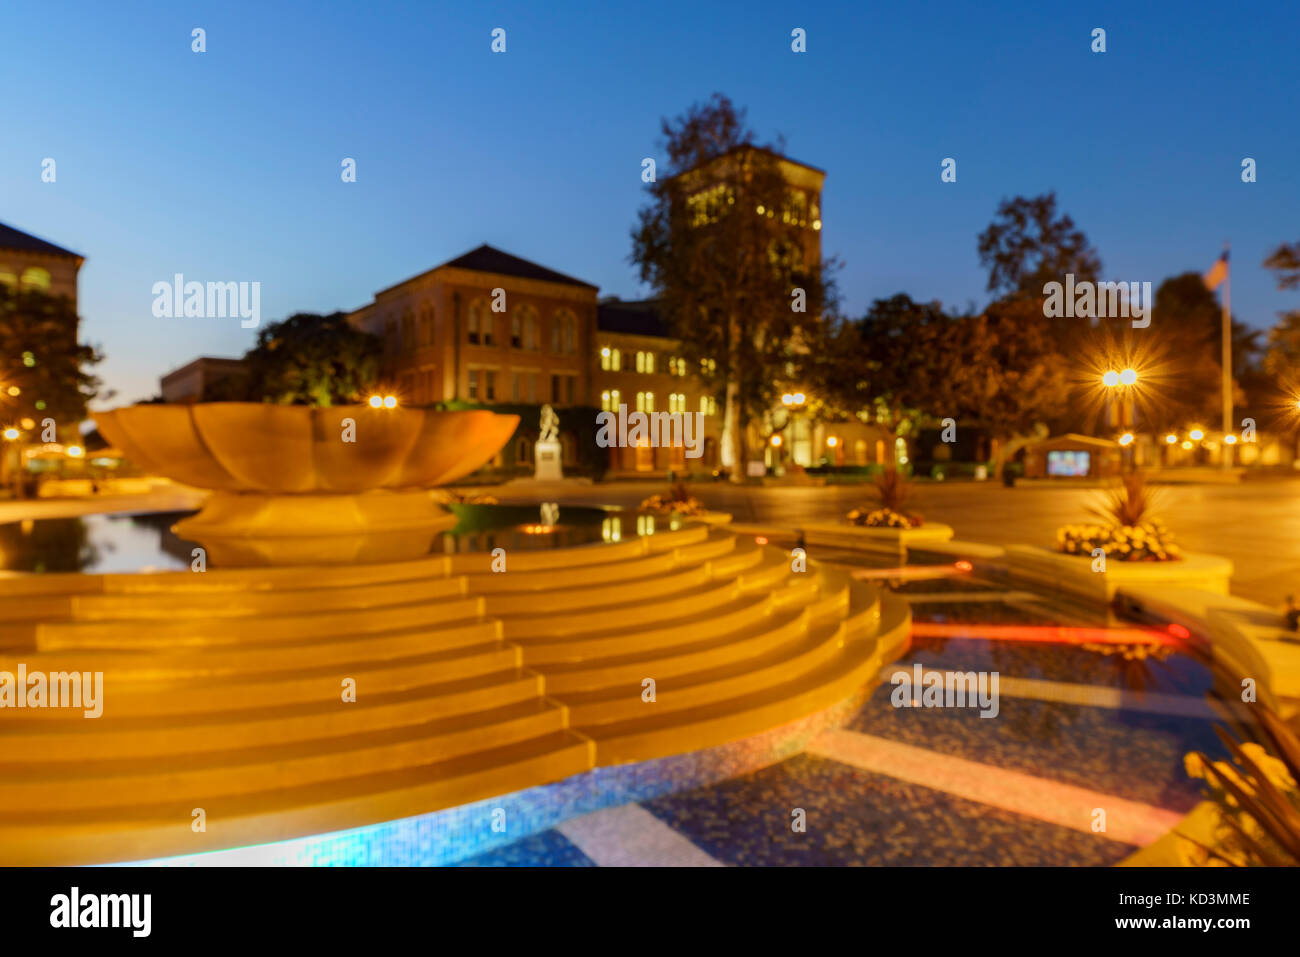 Los Angeles, OCT 8: Night blur view of the beautiful fountain and Bovard Auditorium on OCT 8, 2017 at University of Southern California, Los Angeles,  Stock Photo